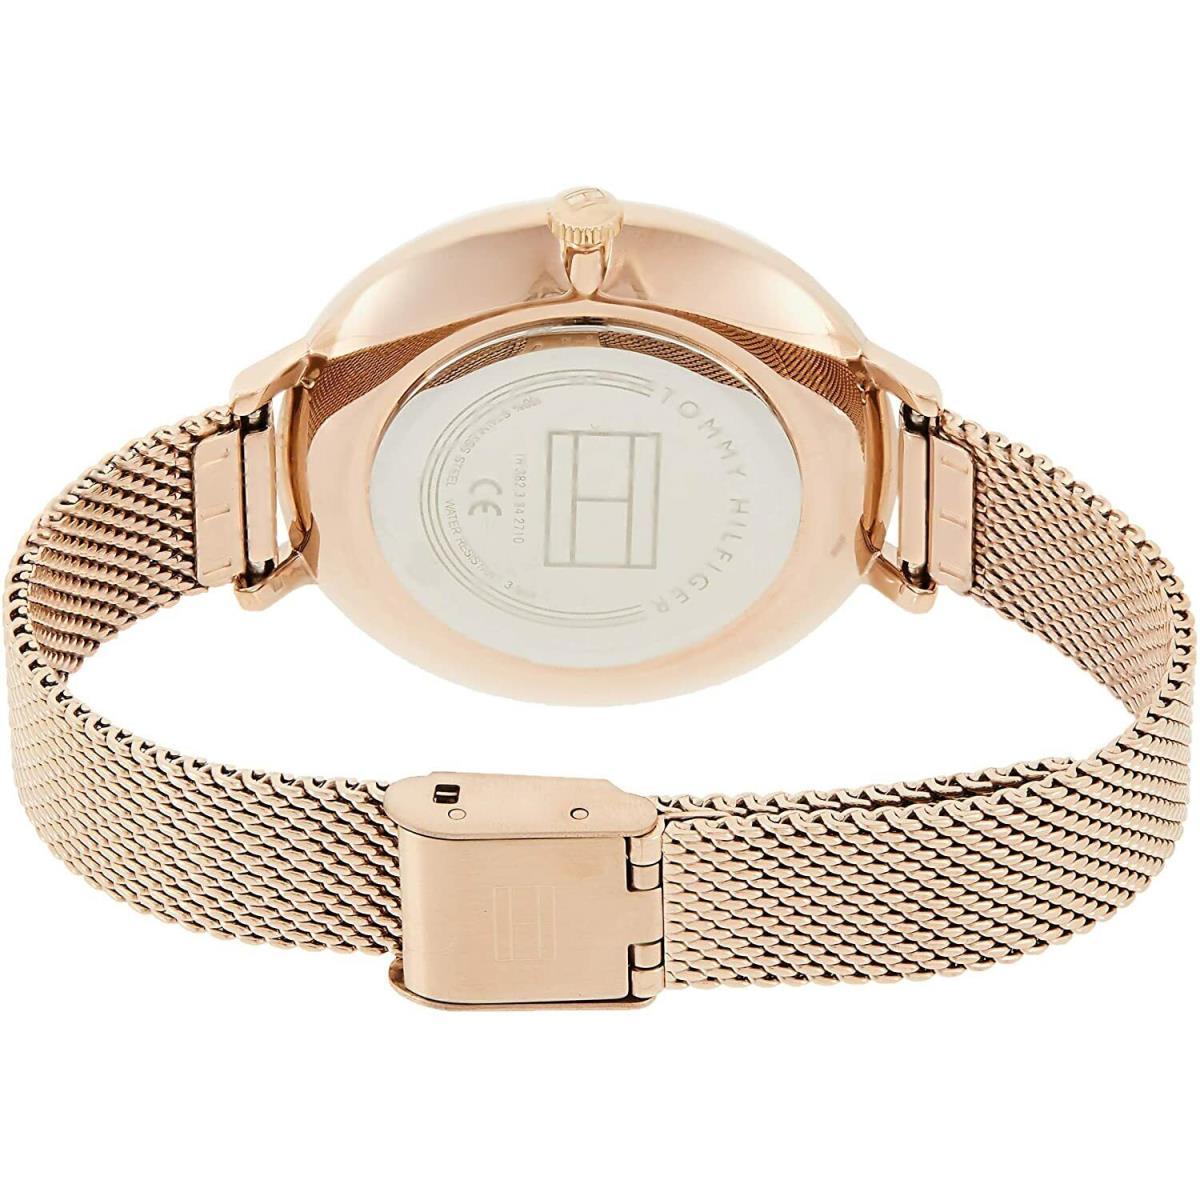 Tommy Hilfiger Alexa Mesh Rose Gold Tone Stainless Steel Women s Watch - 1782158 - Dial: Rose Gold, Band: Rose Gold Tone, Bezel: Rose Gold